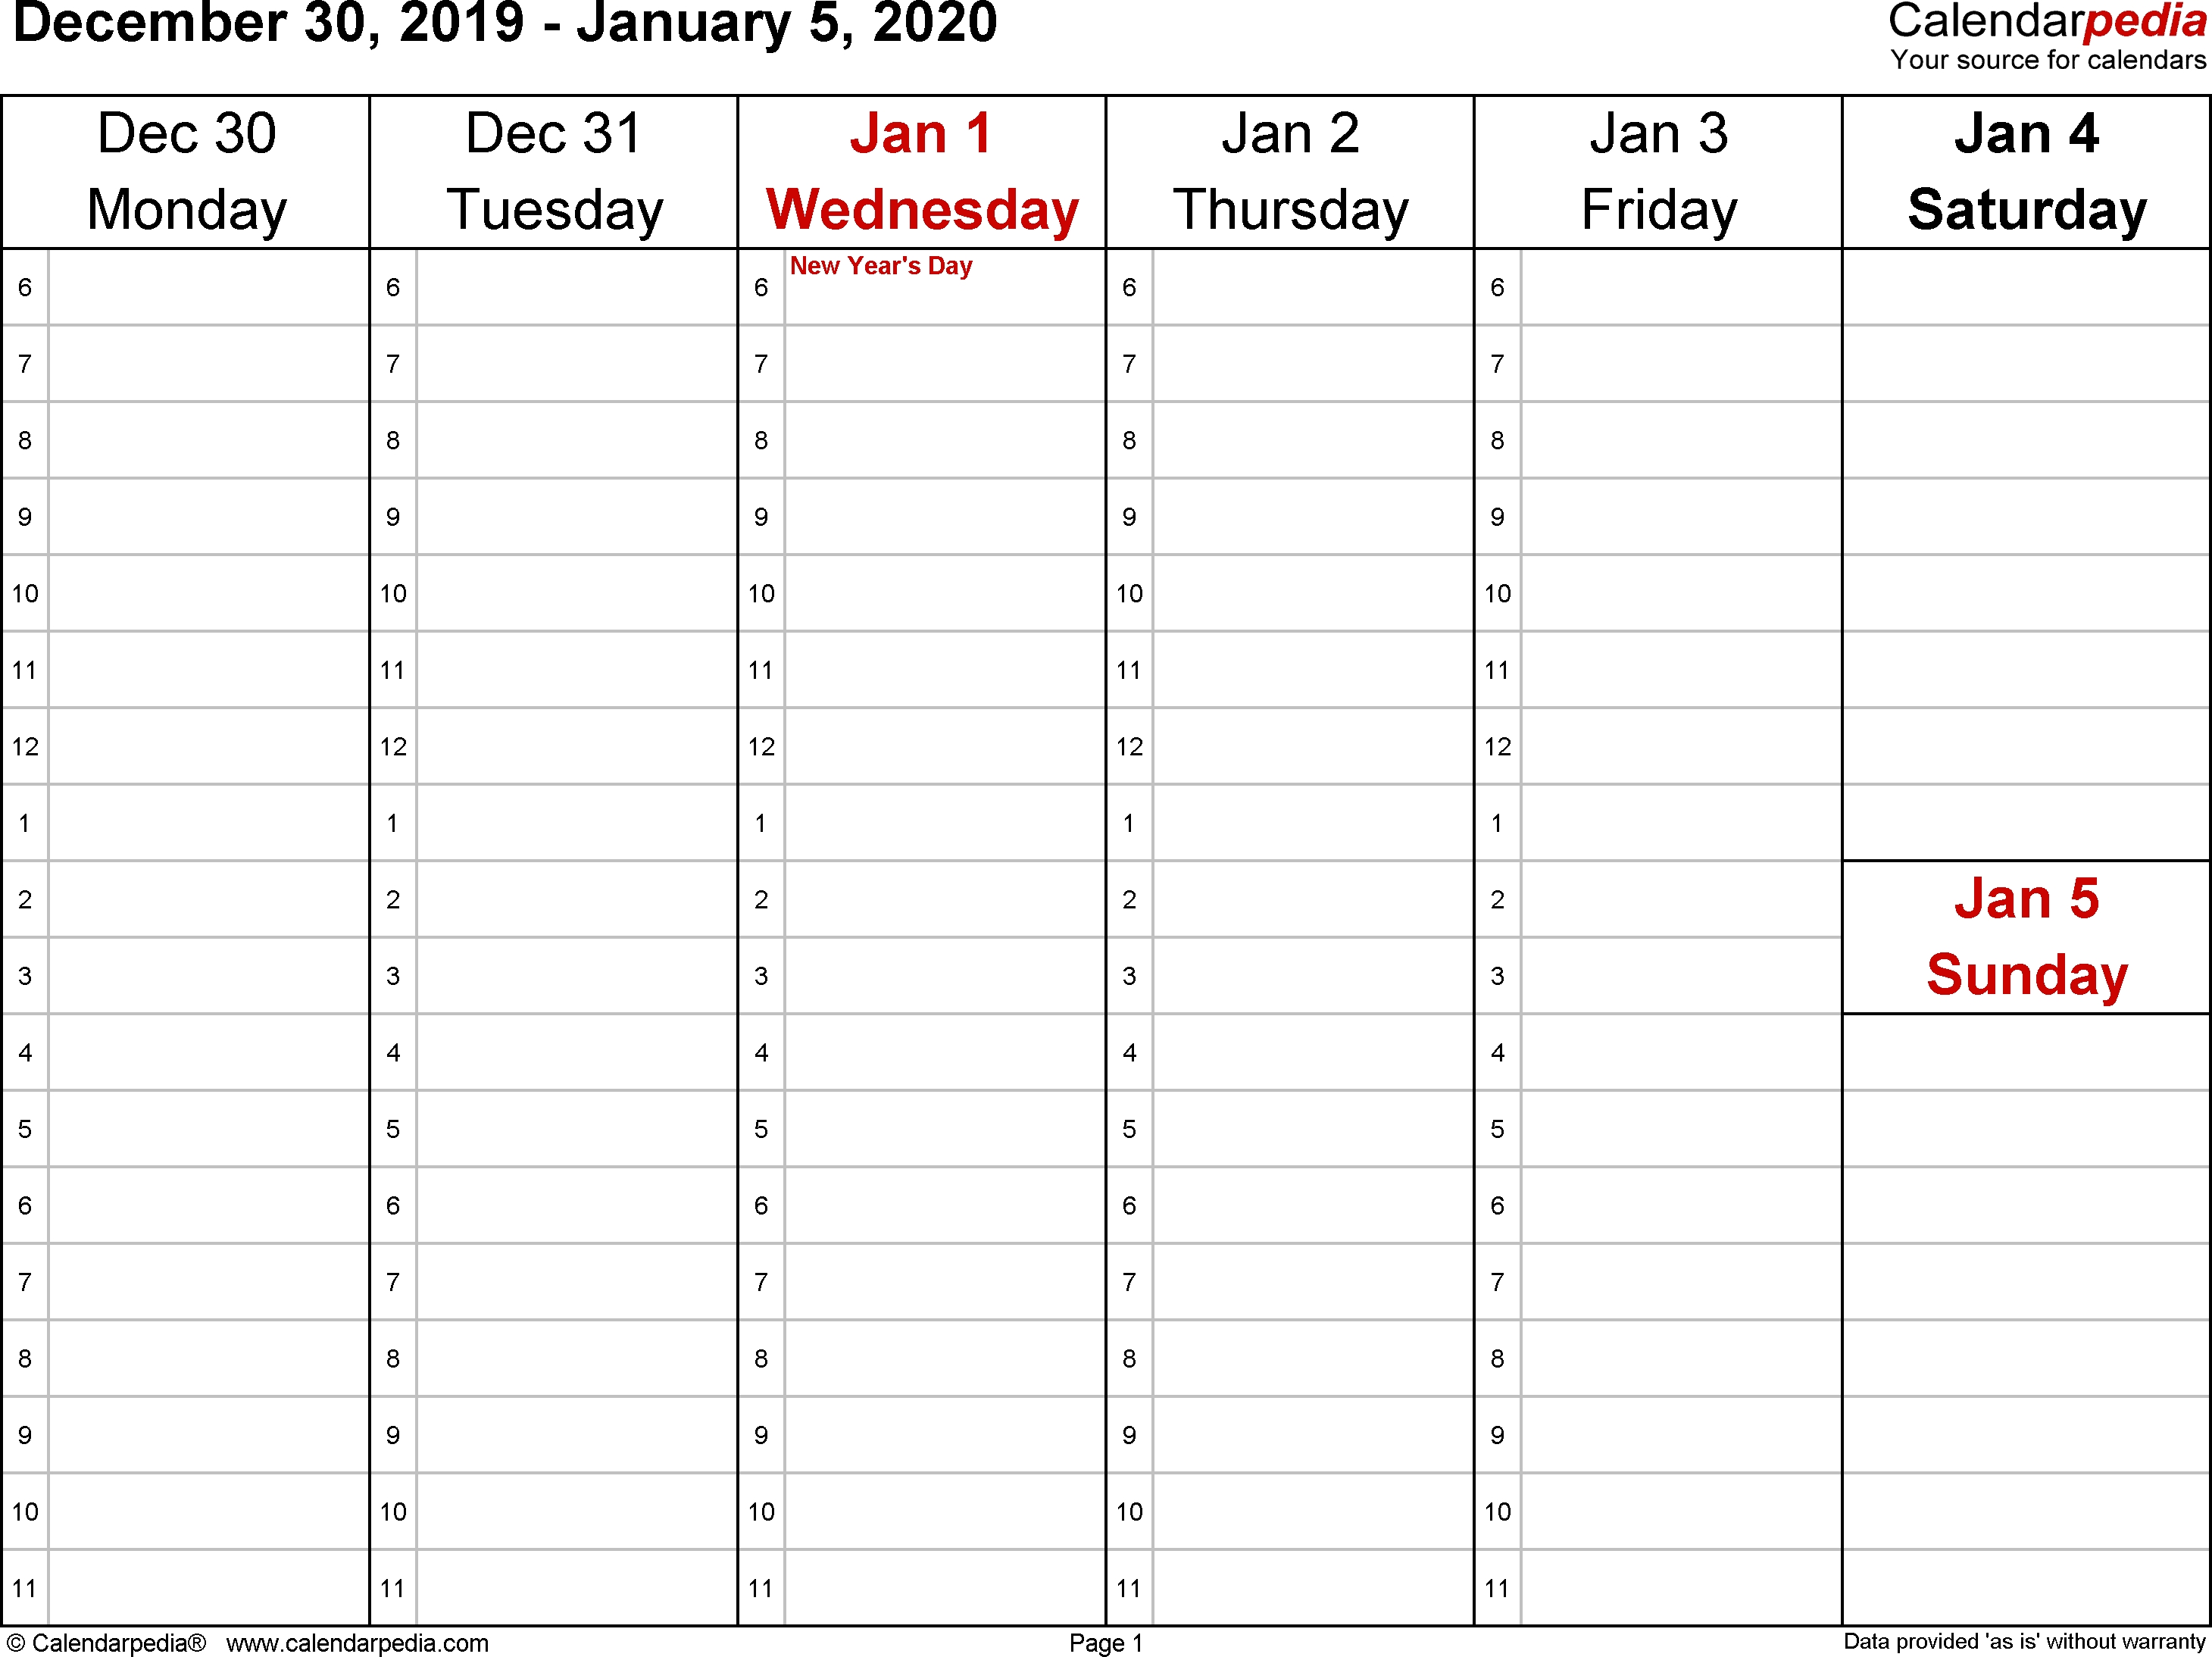 Weekly Calendars 2020 For Word - 12 Free Printable Templates in Printable Calenar For 2020 With Space To Write